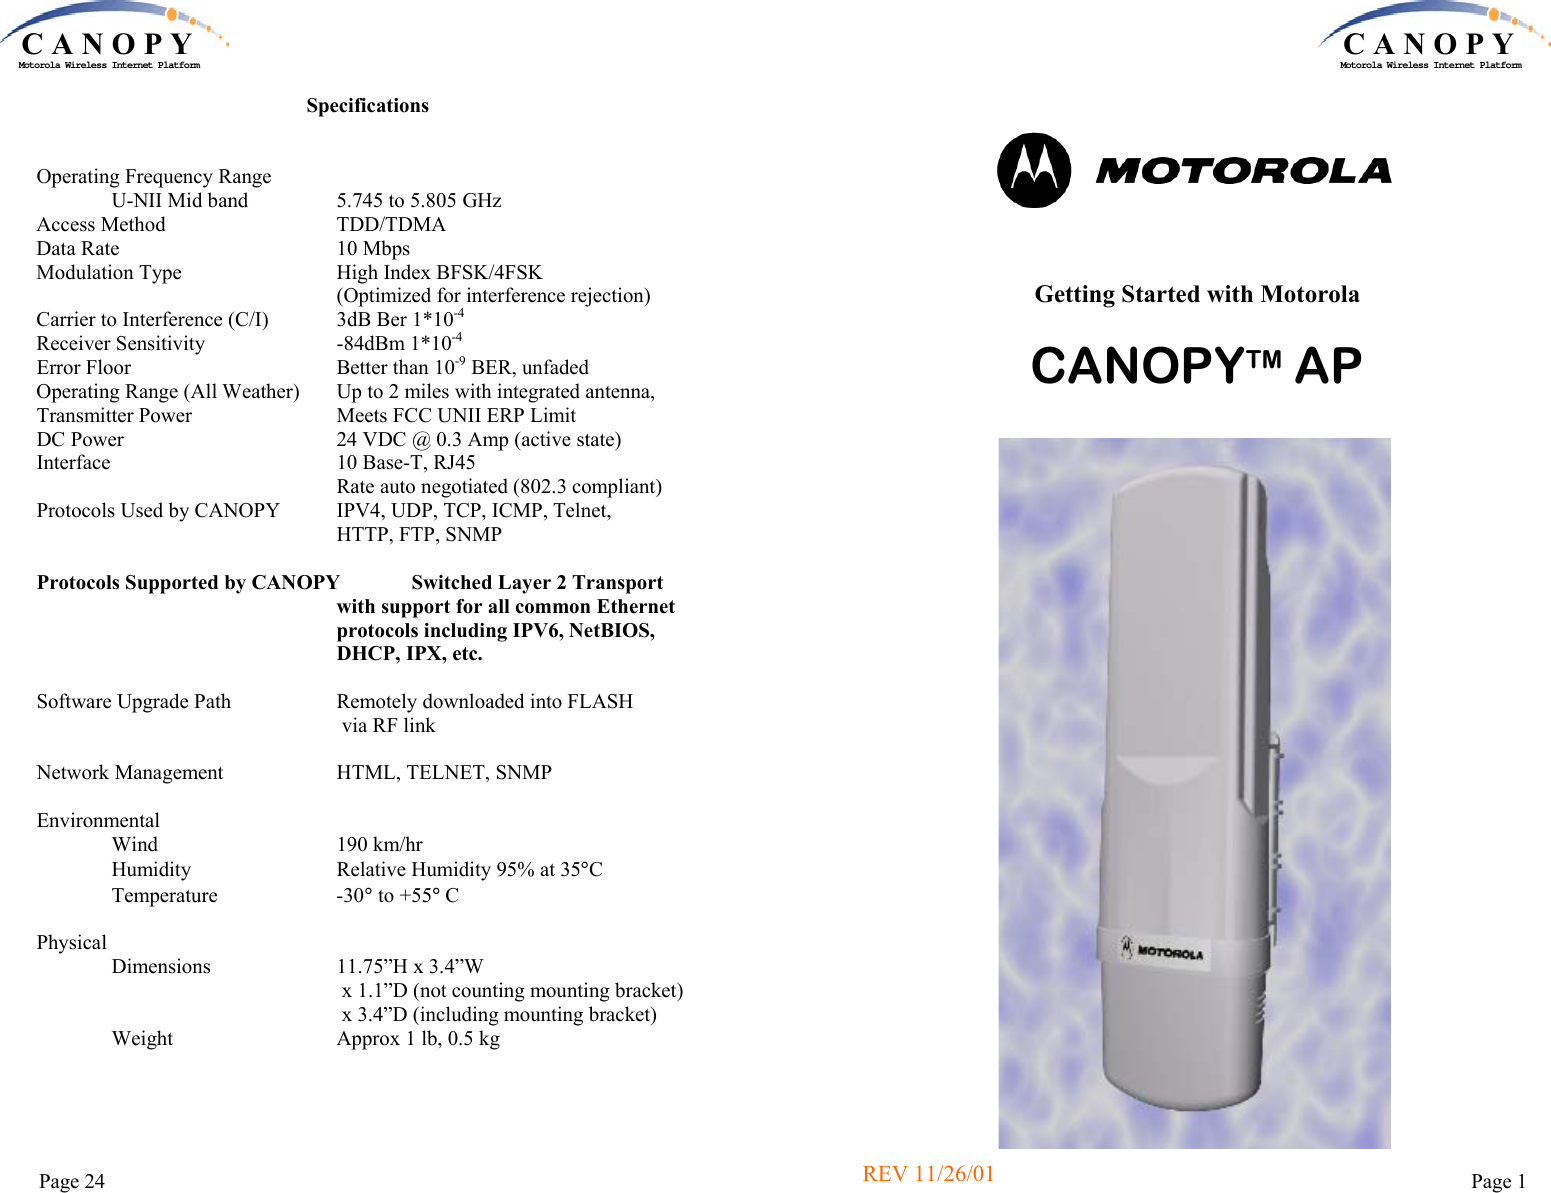 C A N O P YMotorola Wireless Internet PlatformPage 24 Specifications   Operating Frequency Range               U-NII Mid band                 5.745 to 5.805 GHz Access Method                                 TDD/TDMA Data Rate                                         10 Mbps Modulation Type                              High Index BFSK/4FSK                                                           (Optimized for interference rejection) Carrier to Interference (C/I)             3dB Ber 1*10-4 Receiver Sensitivity                         -84dBm 1*10-4 Error Floor                                       Better than 10-9 BER, unfaded Operating Range (All Weather)       Up to 2 miles with integrated antenna,Transmitter Power                            Meets FCC UNII ERP Limit DC Power                                        24 VDC @ 0.3 Amp (active state) Interface                                            10 Base-T, RJ45                                                           Rate auto negotiated (802.3 compliant) Protocols Used by CANOPY           IPV4, UDP, TCP, ICMP, Telnet,  HTTP, FTP, SNMP  Protocols Supported by CANOPY              Switched Layer 2 Transport  with support for all common Ethernet protocols including IPV6, NetBIOS,  DHCP, IPX, etc.  Software Upgrade Path                    Remotely downloaded into FLASH  via RF link  Network Management                      HTML, TELNET, SNMP  Environmental                Wind                                  190 km/hr                Humidity                            Relative Humidity 95% at 35°C                Temperature                       -30° to +55° C  Physical                Dimensions                        11.75”H x 3.4”W                                                            x 1.1”D (not counting mounting bracket)                                                            x 3.4”D (including mounting bracket)                Weight                               Approx 1 lb, 0.5 kg C A N O P YMotorola Wireless Internet PlatformPage 1  Getting Started with Motorola   CANOPYTM AP REV 11/26/01 